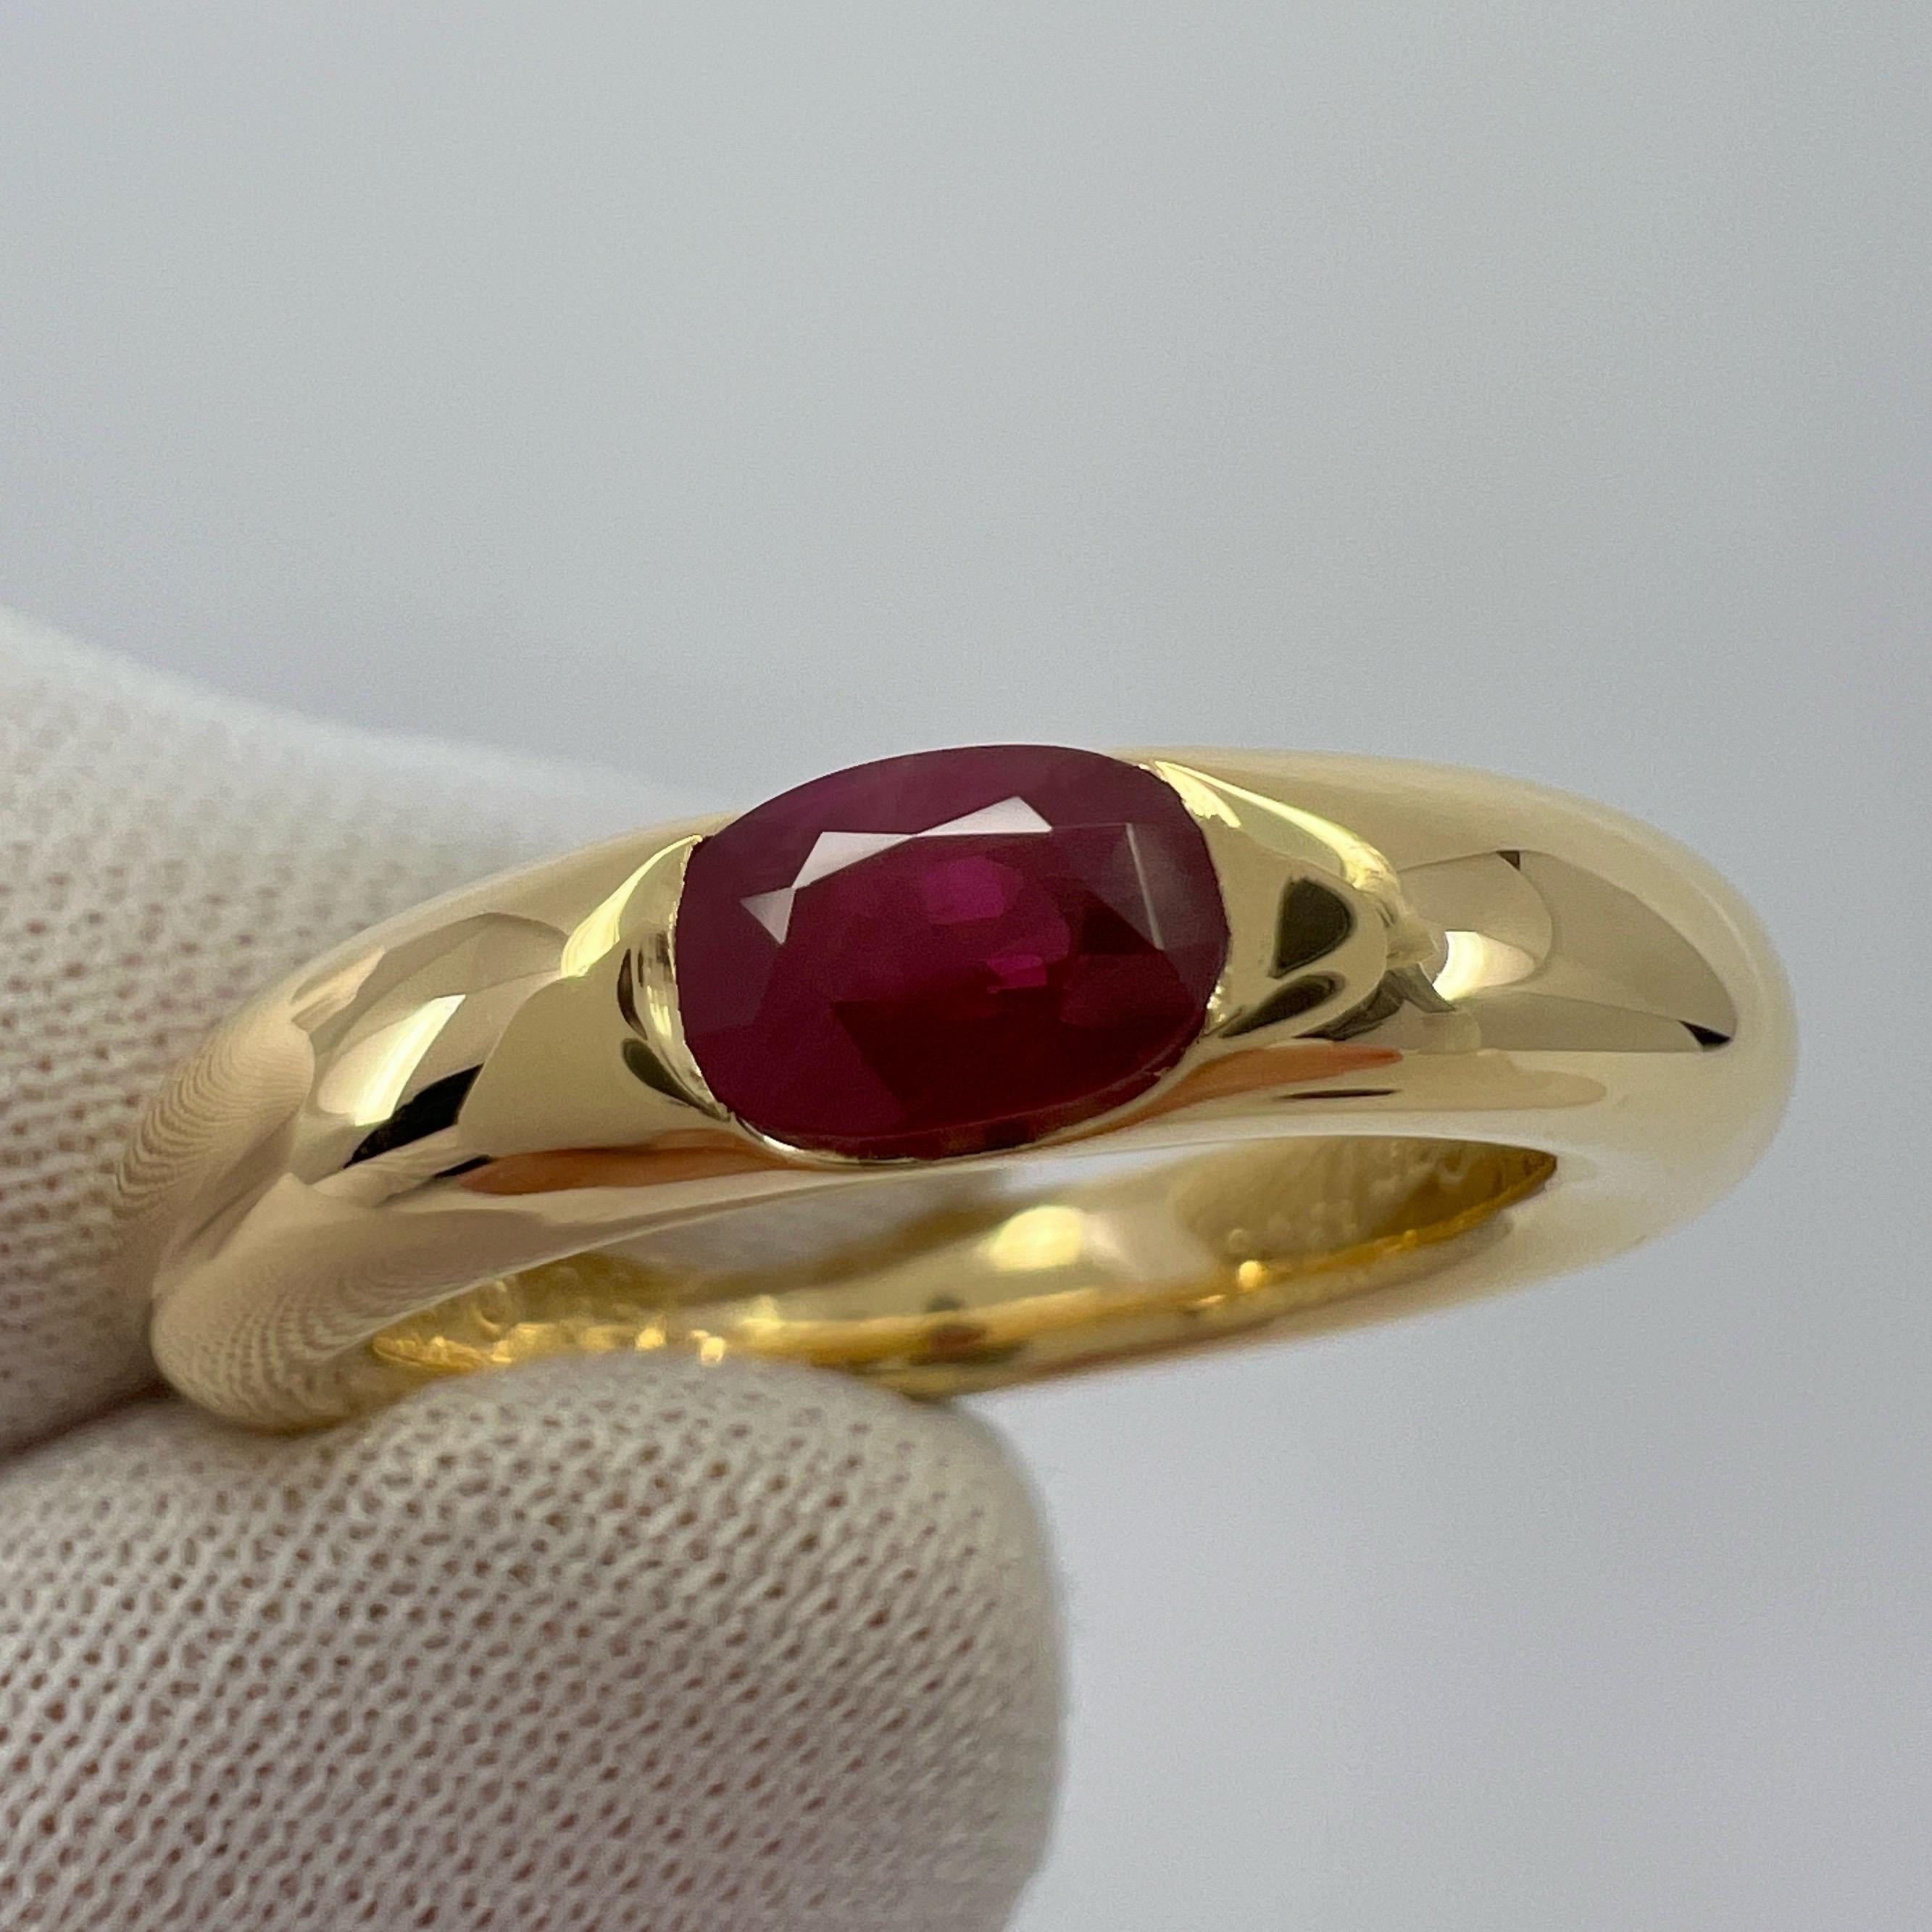 Vintage Cartier Deep Red Ruby 18k Yellow Gold Solitaire Band Ring.

Stunning yellow gold ring set with a vivid pink red ruby. Fine jewellery houses like Cartier only use the finest of gemstones and this ruby is no exception. An excellent quality